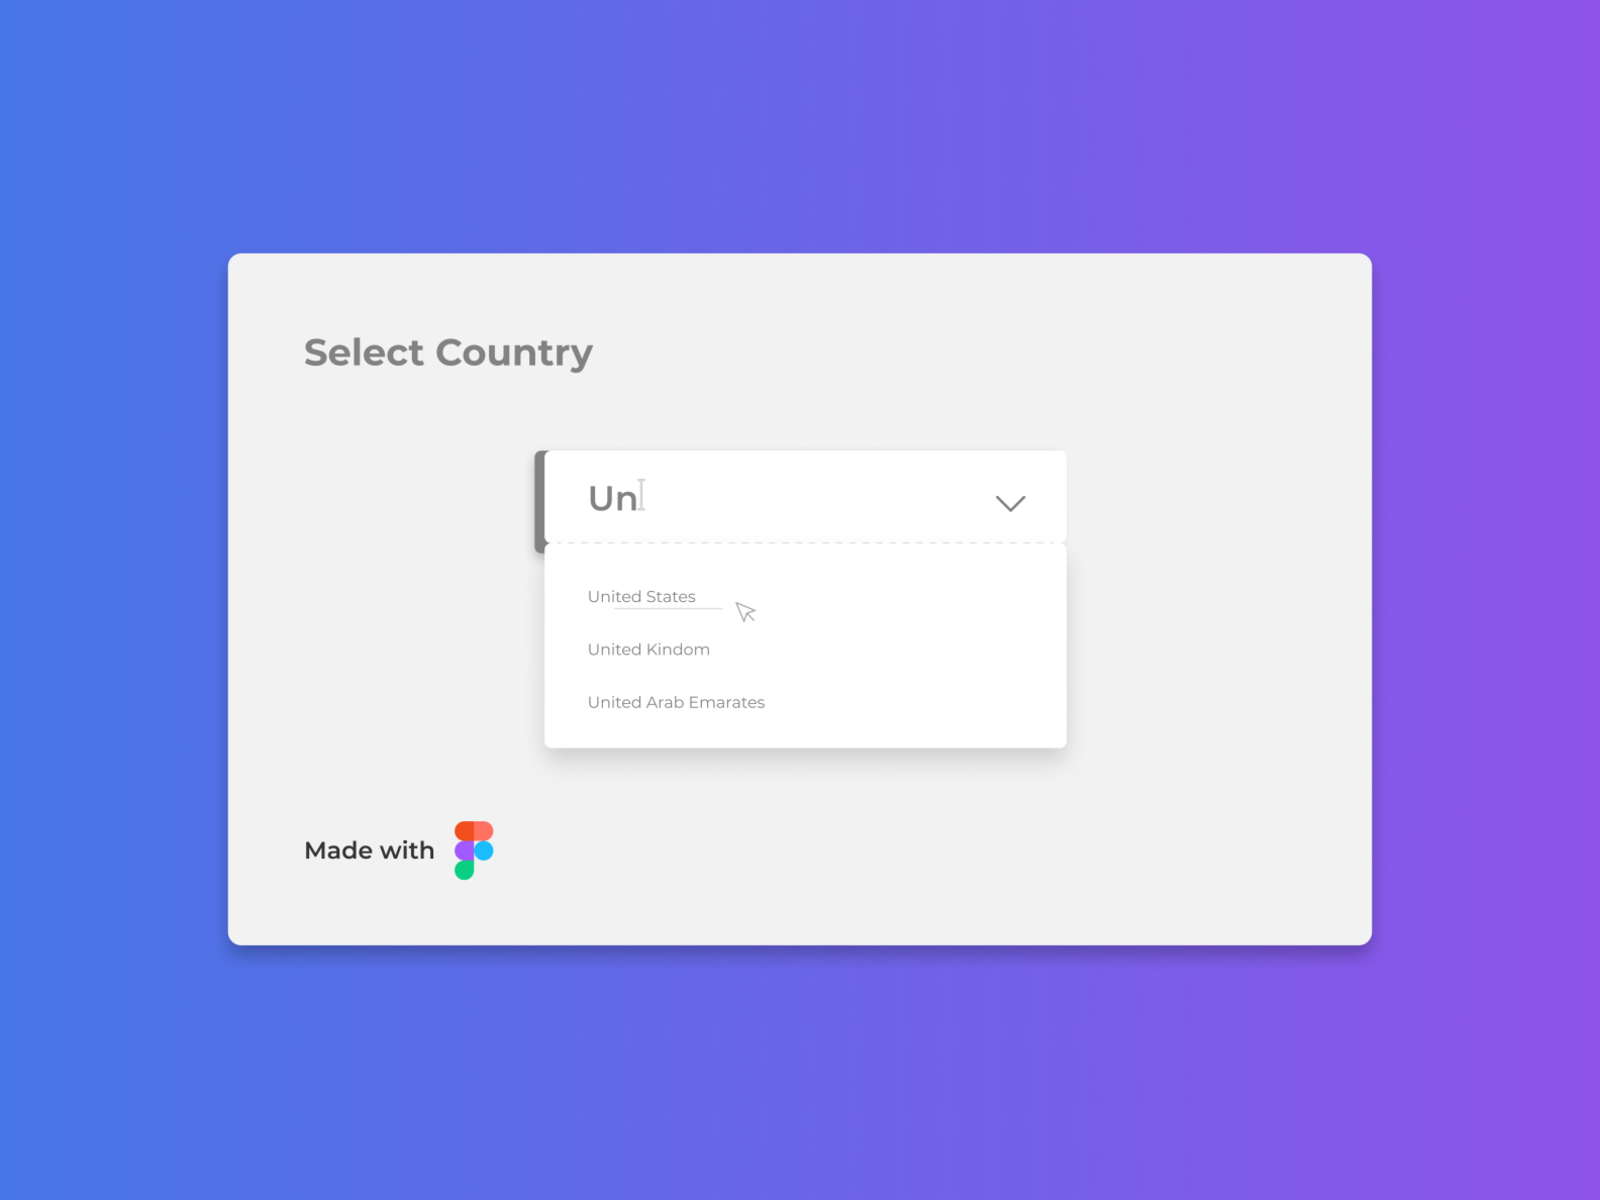 Static mockup of a custom select input to select countries